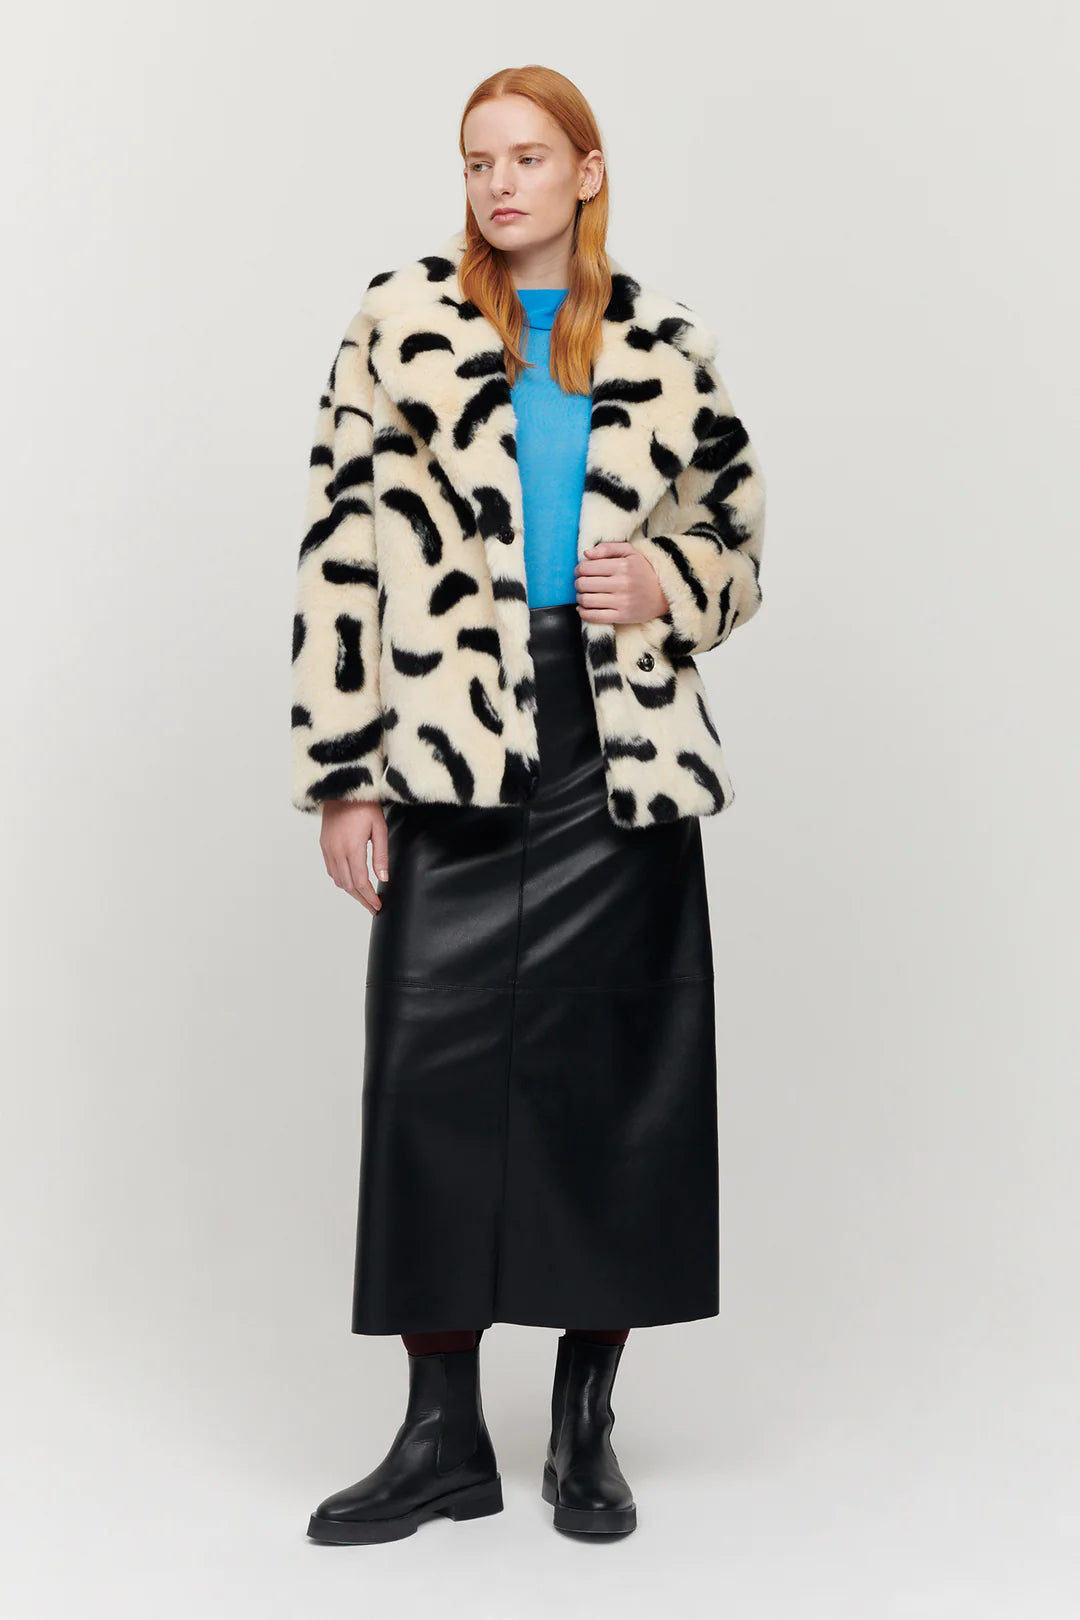 Ecru boxy faux-fur short jacket with V neckline and notch lapel / collar with side seam pockets and random black paintbrush markings